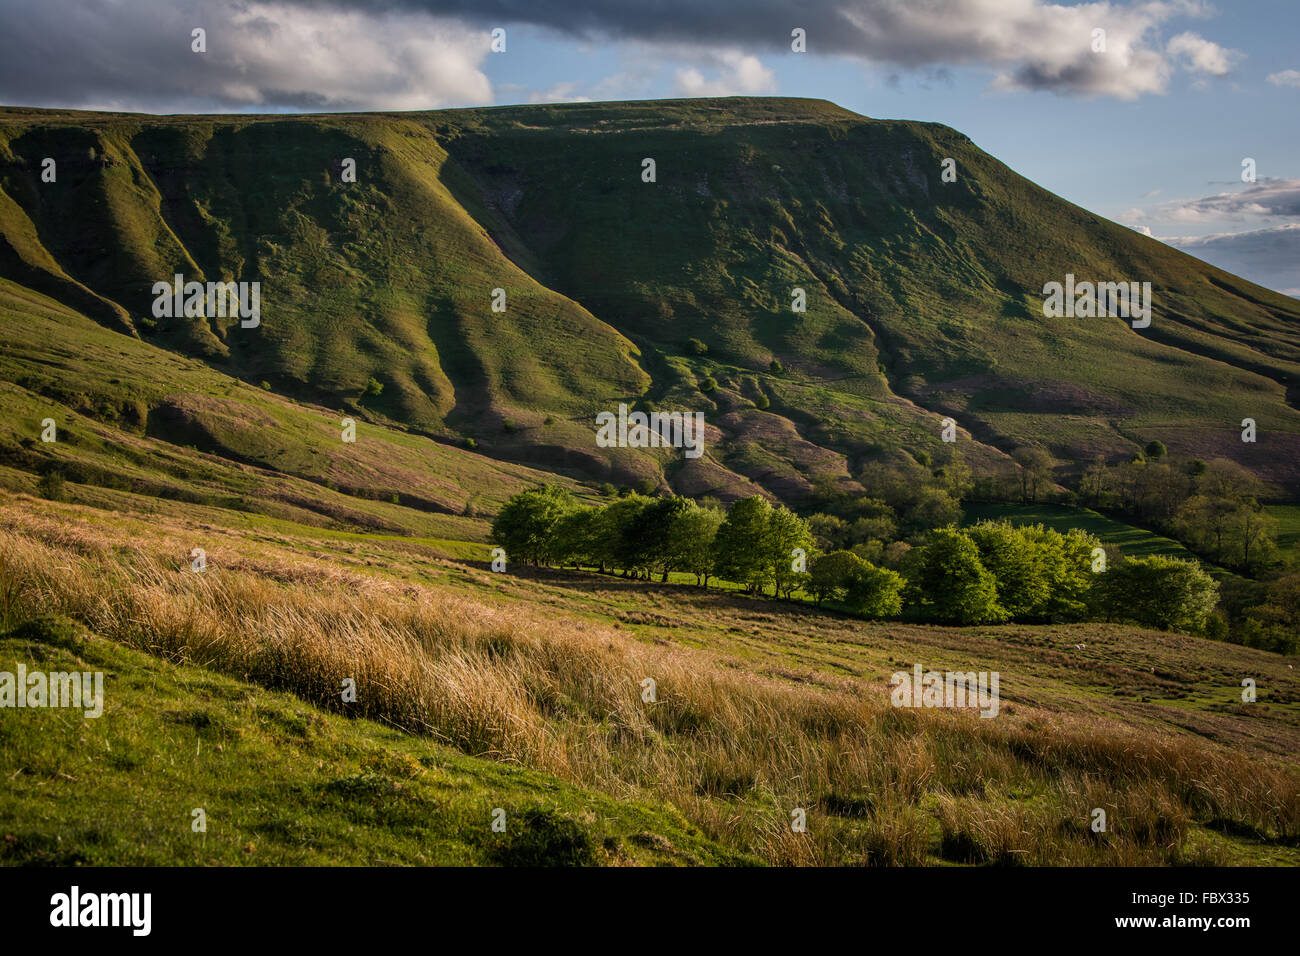 The Black Mountains, Brecon Beacons, Wales late afternoon Stock Photo